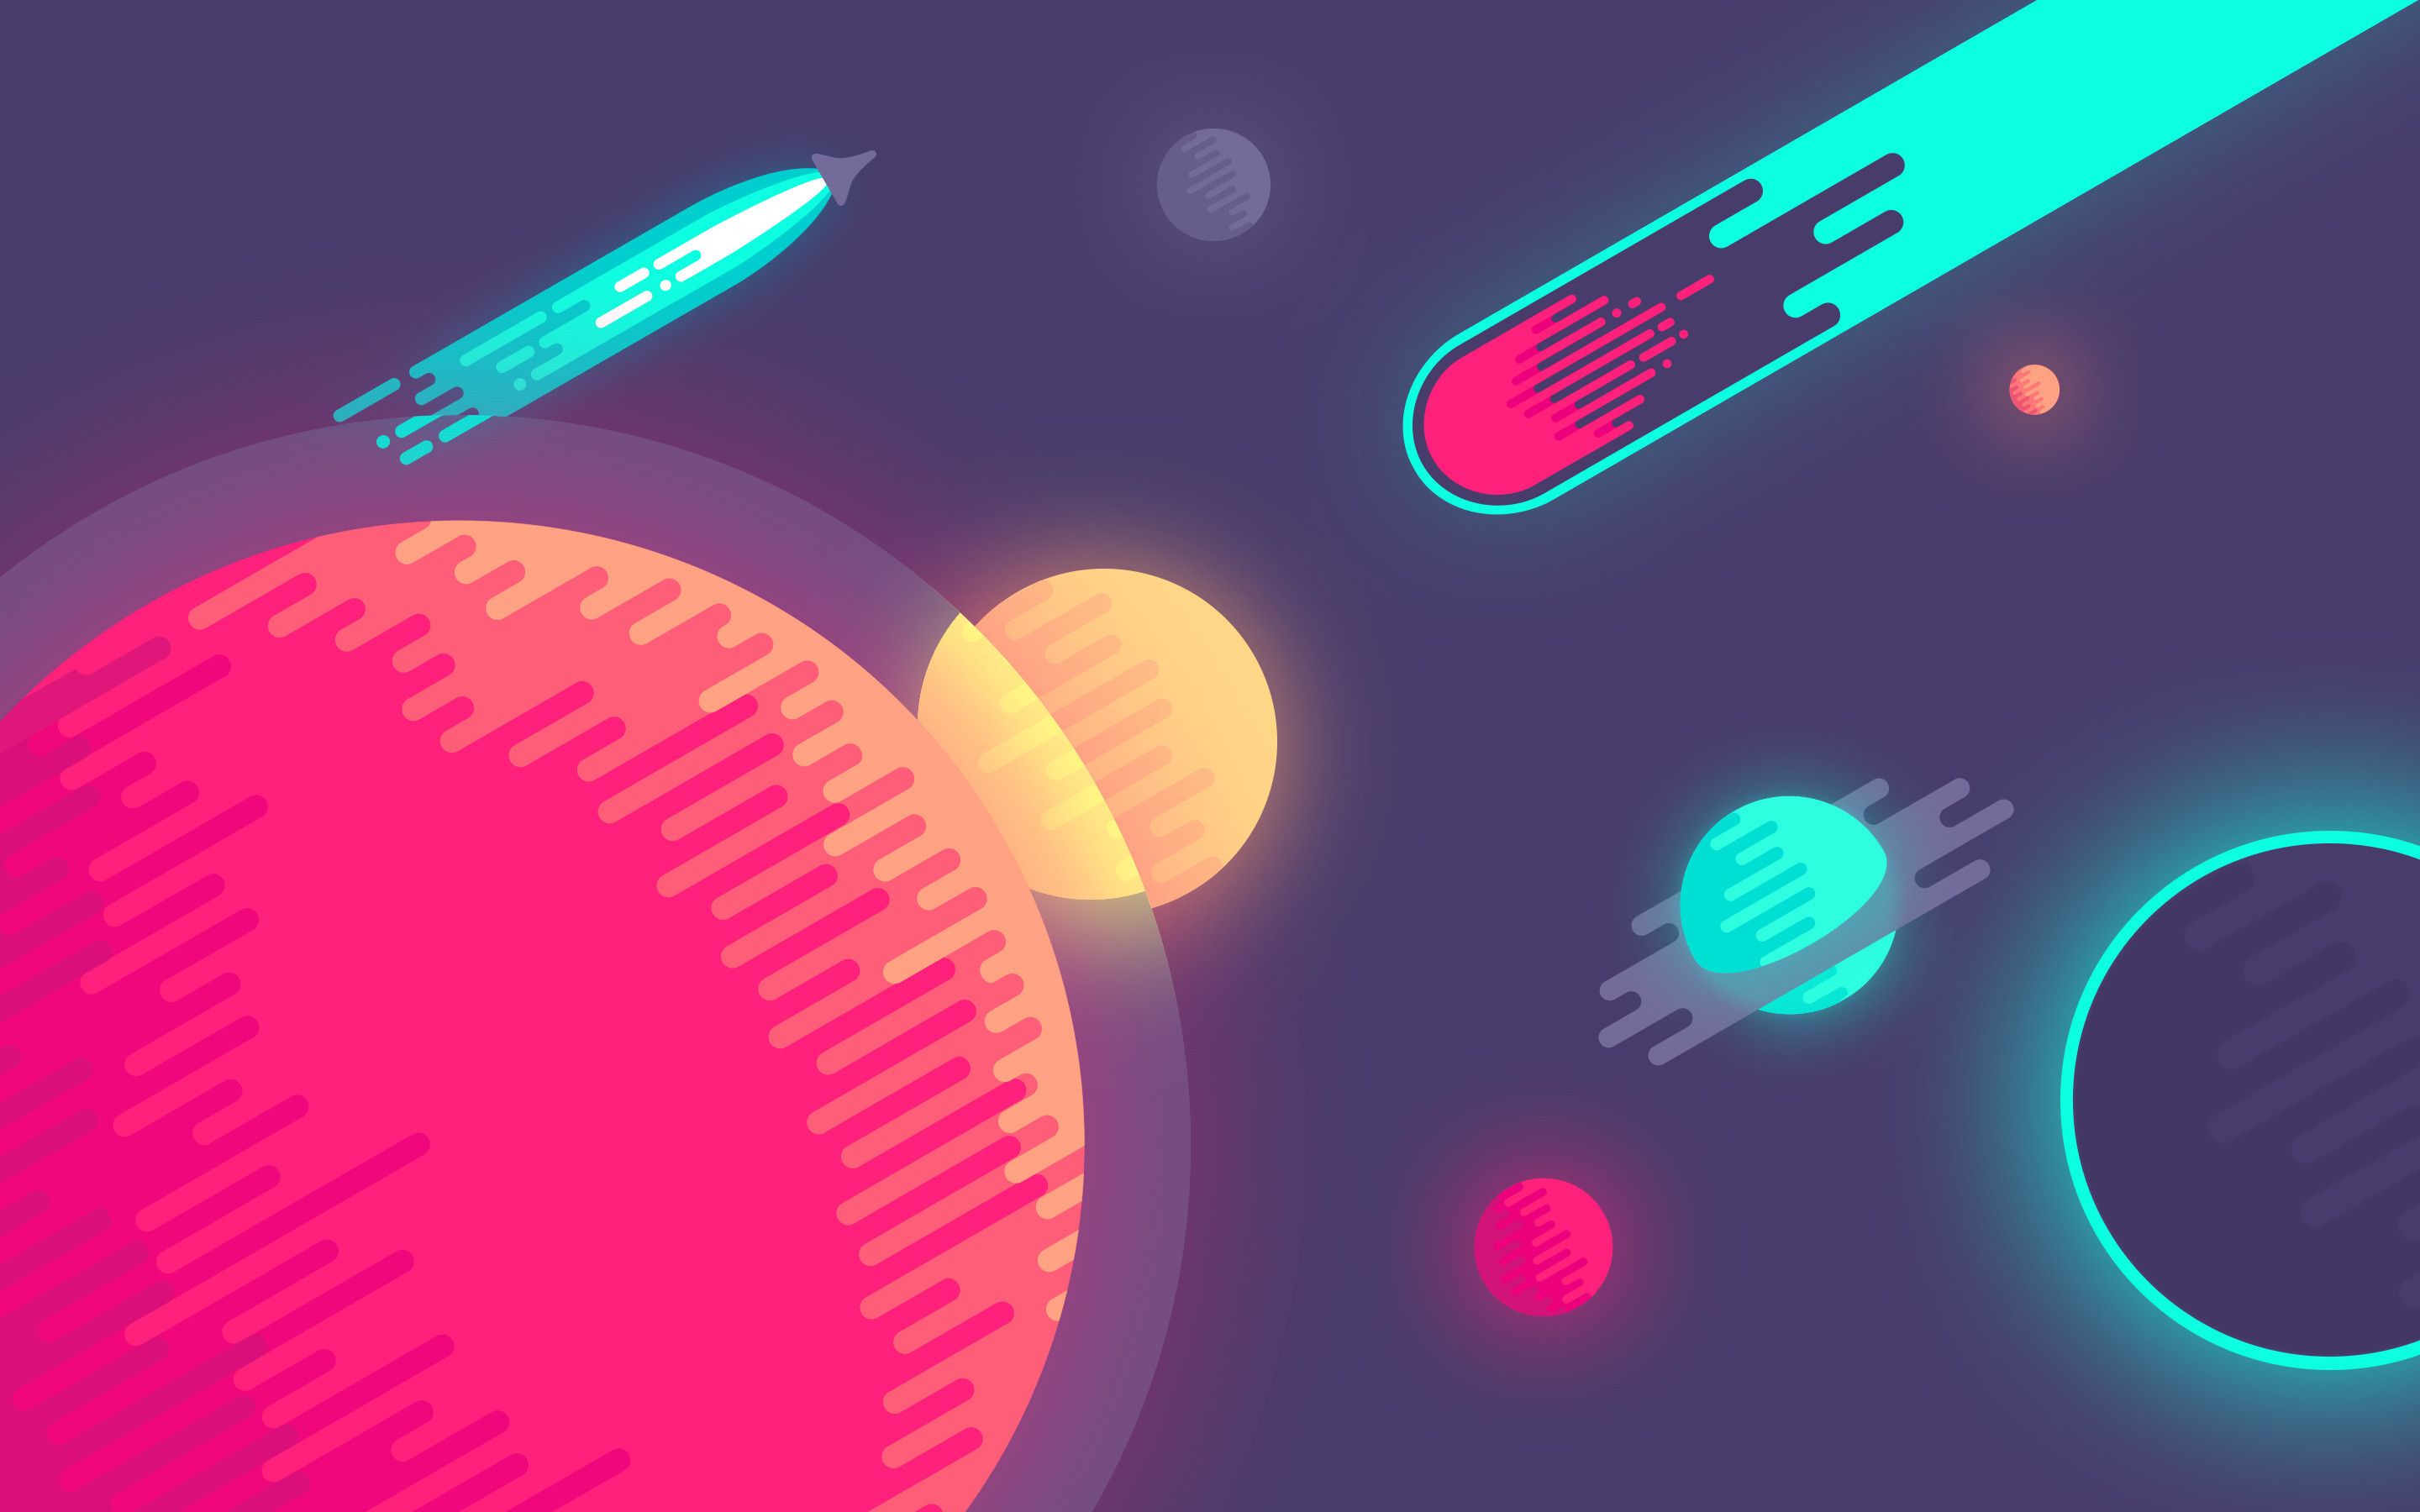 2D Space Wallpaper Free 2D Space Background